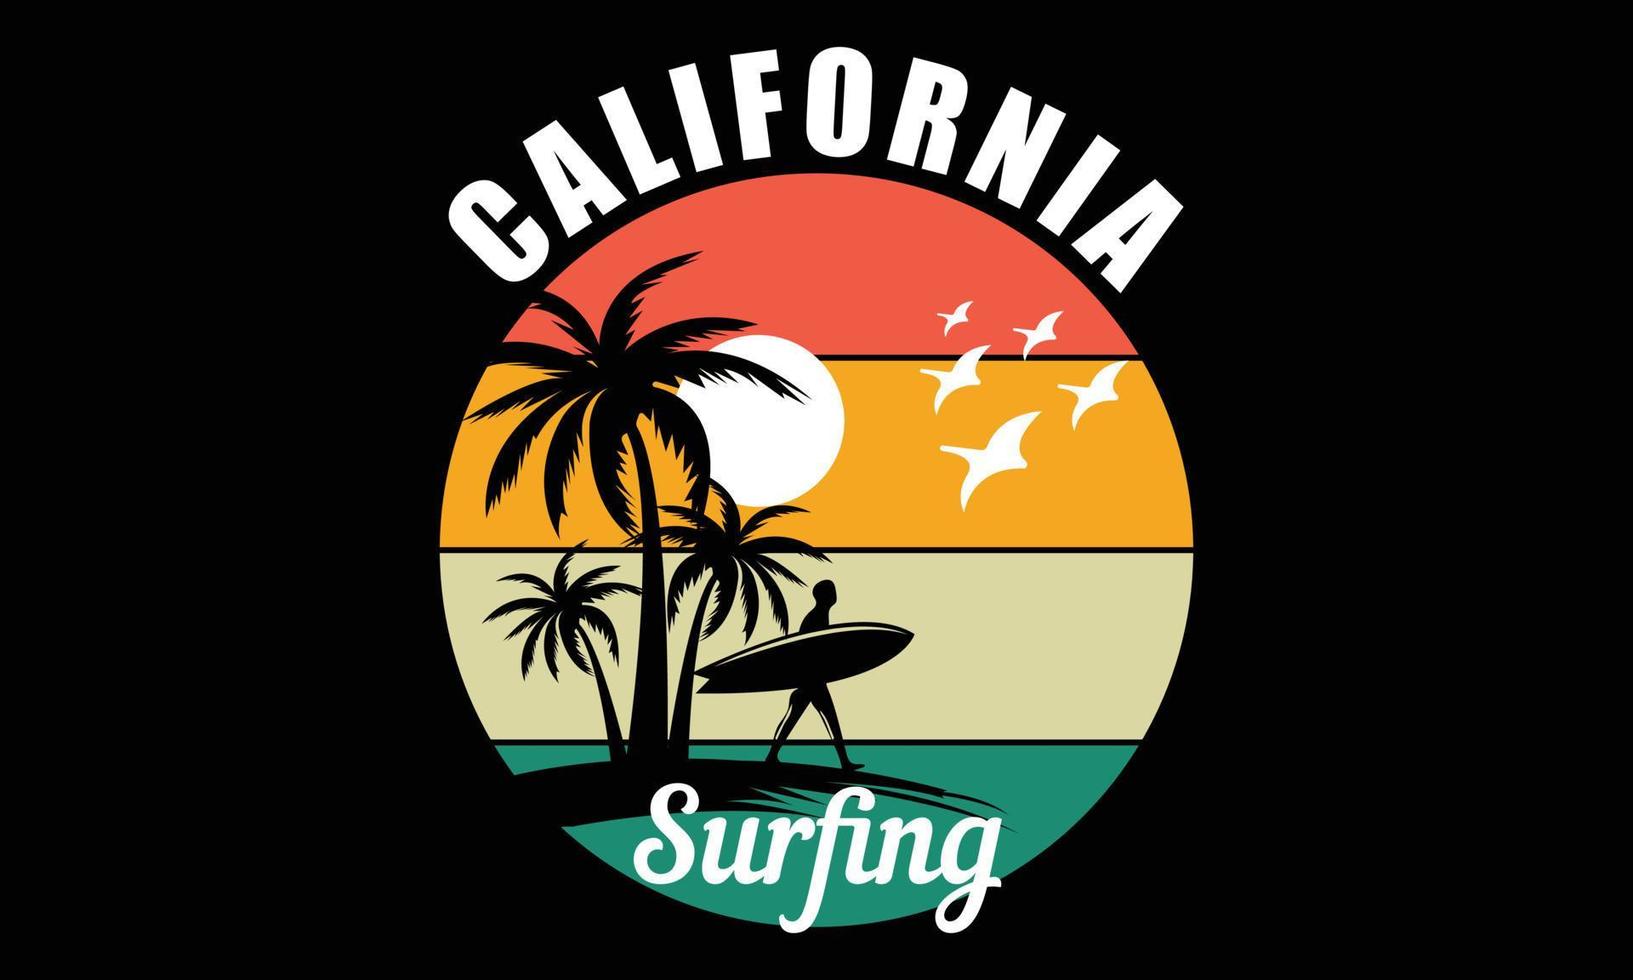 Surfing T-shirt California Typography Vector illustration and colorful design.